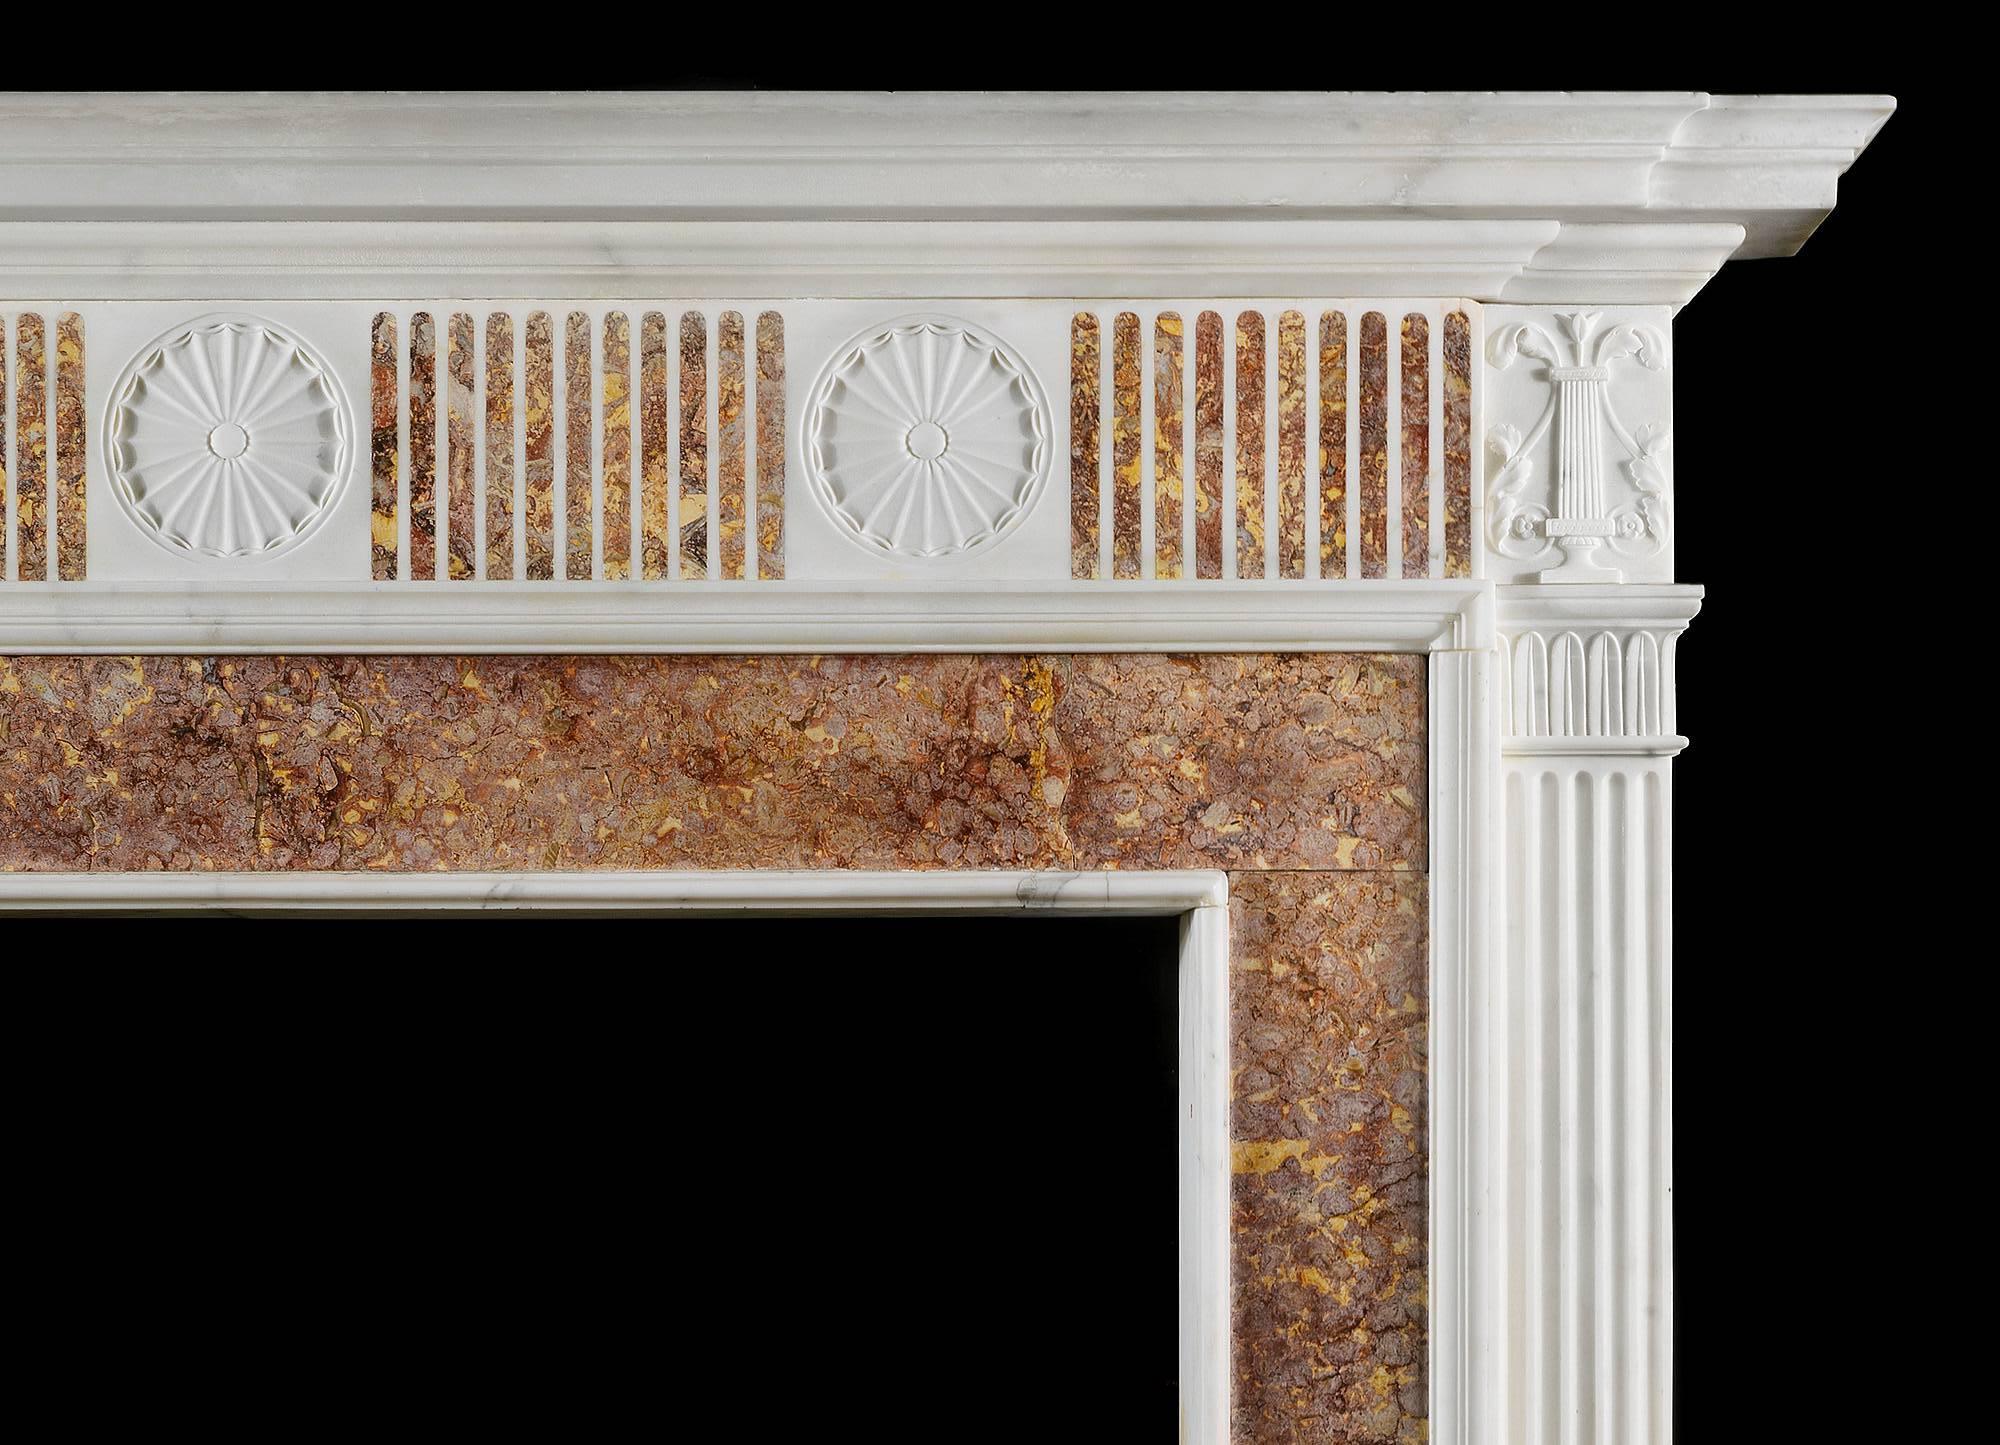 A late 18th century antique fireplace mantel in Statuary and Spanish Brocatelle marble. The breakfront shelf over a frieze with inlaid Brocatelle marble fluting, interspersed by delicate rosette paterae in statuary marble, flanked by florally carved